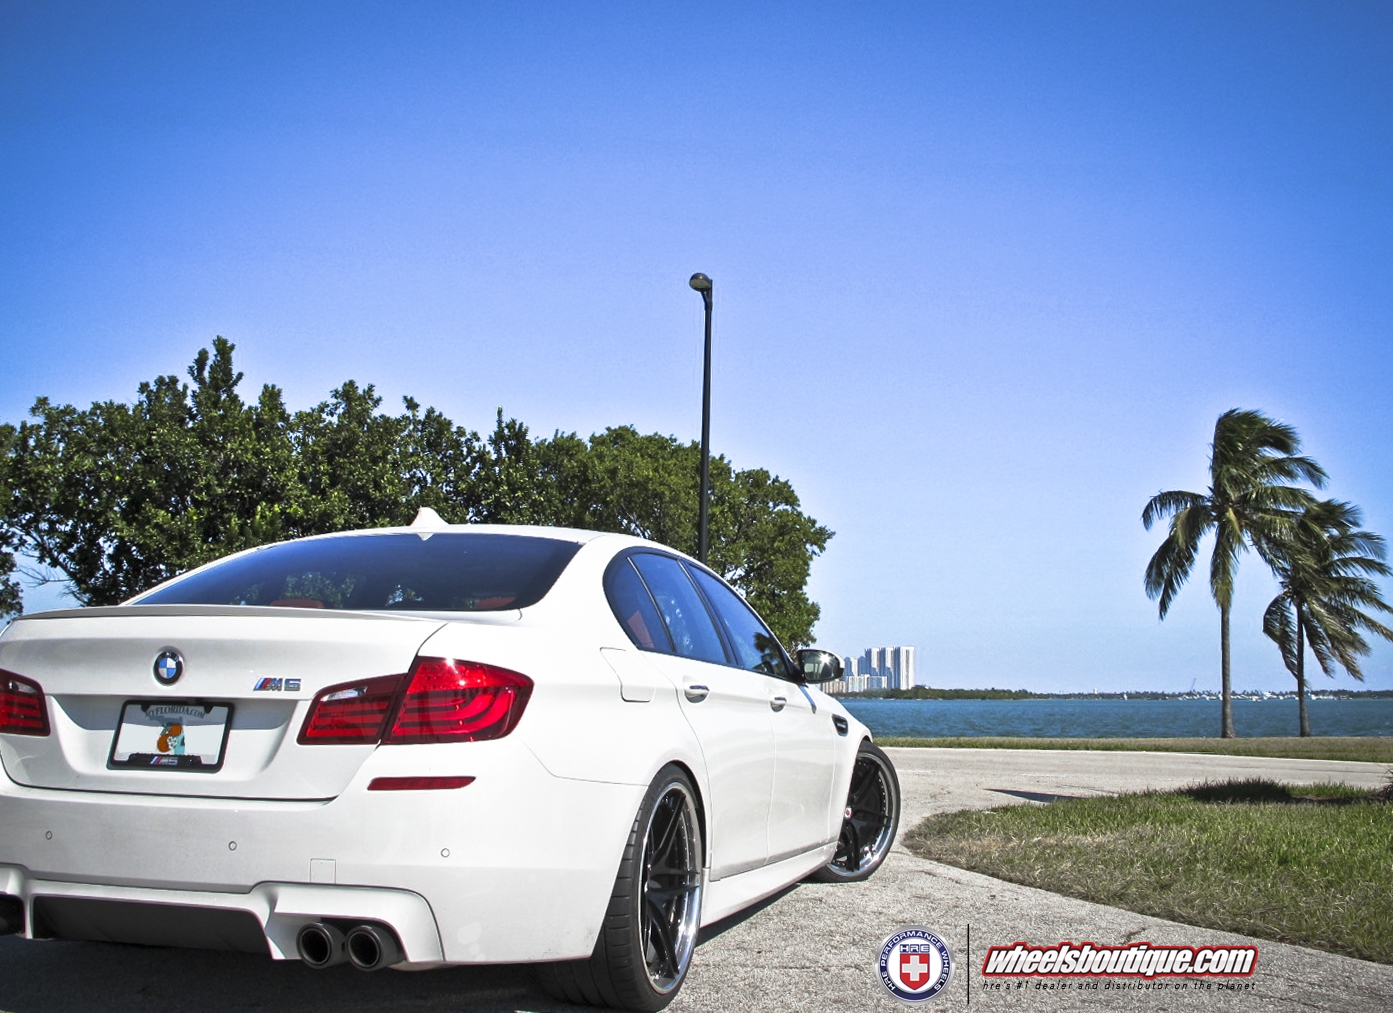 HRE S107’s | New BMW F10 M5